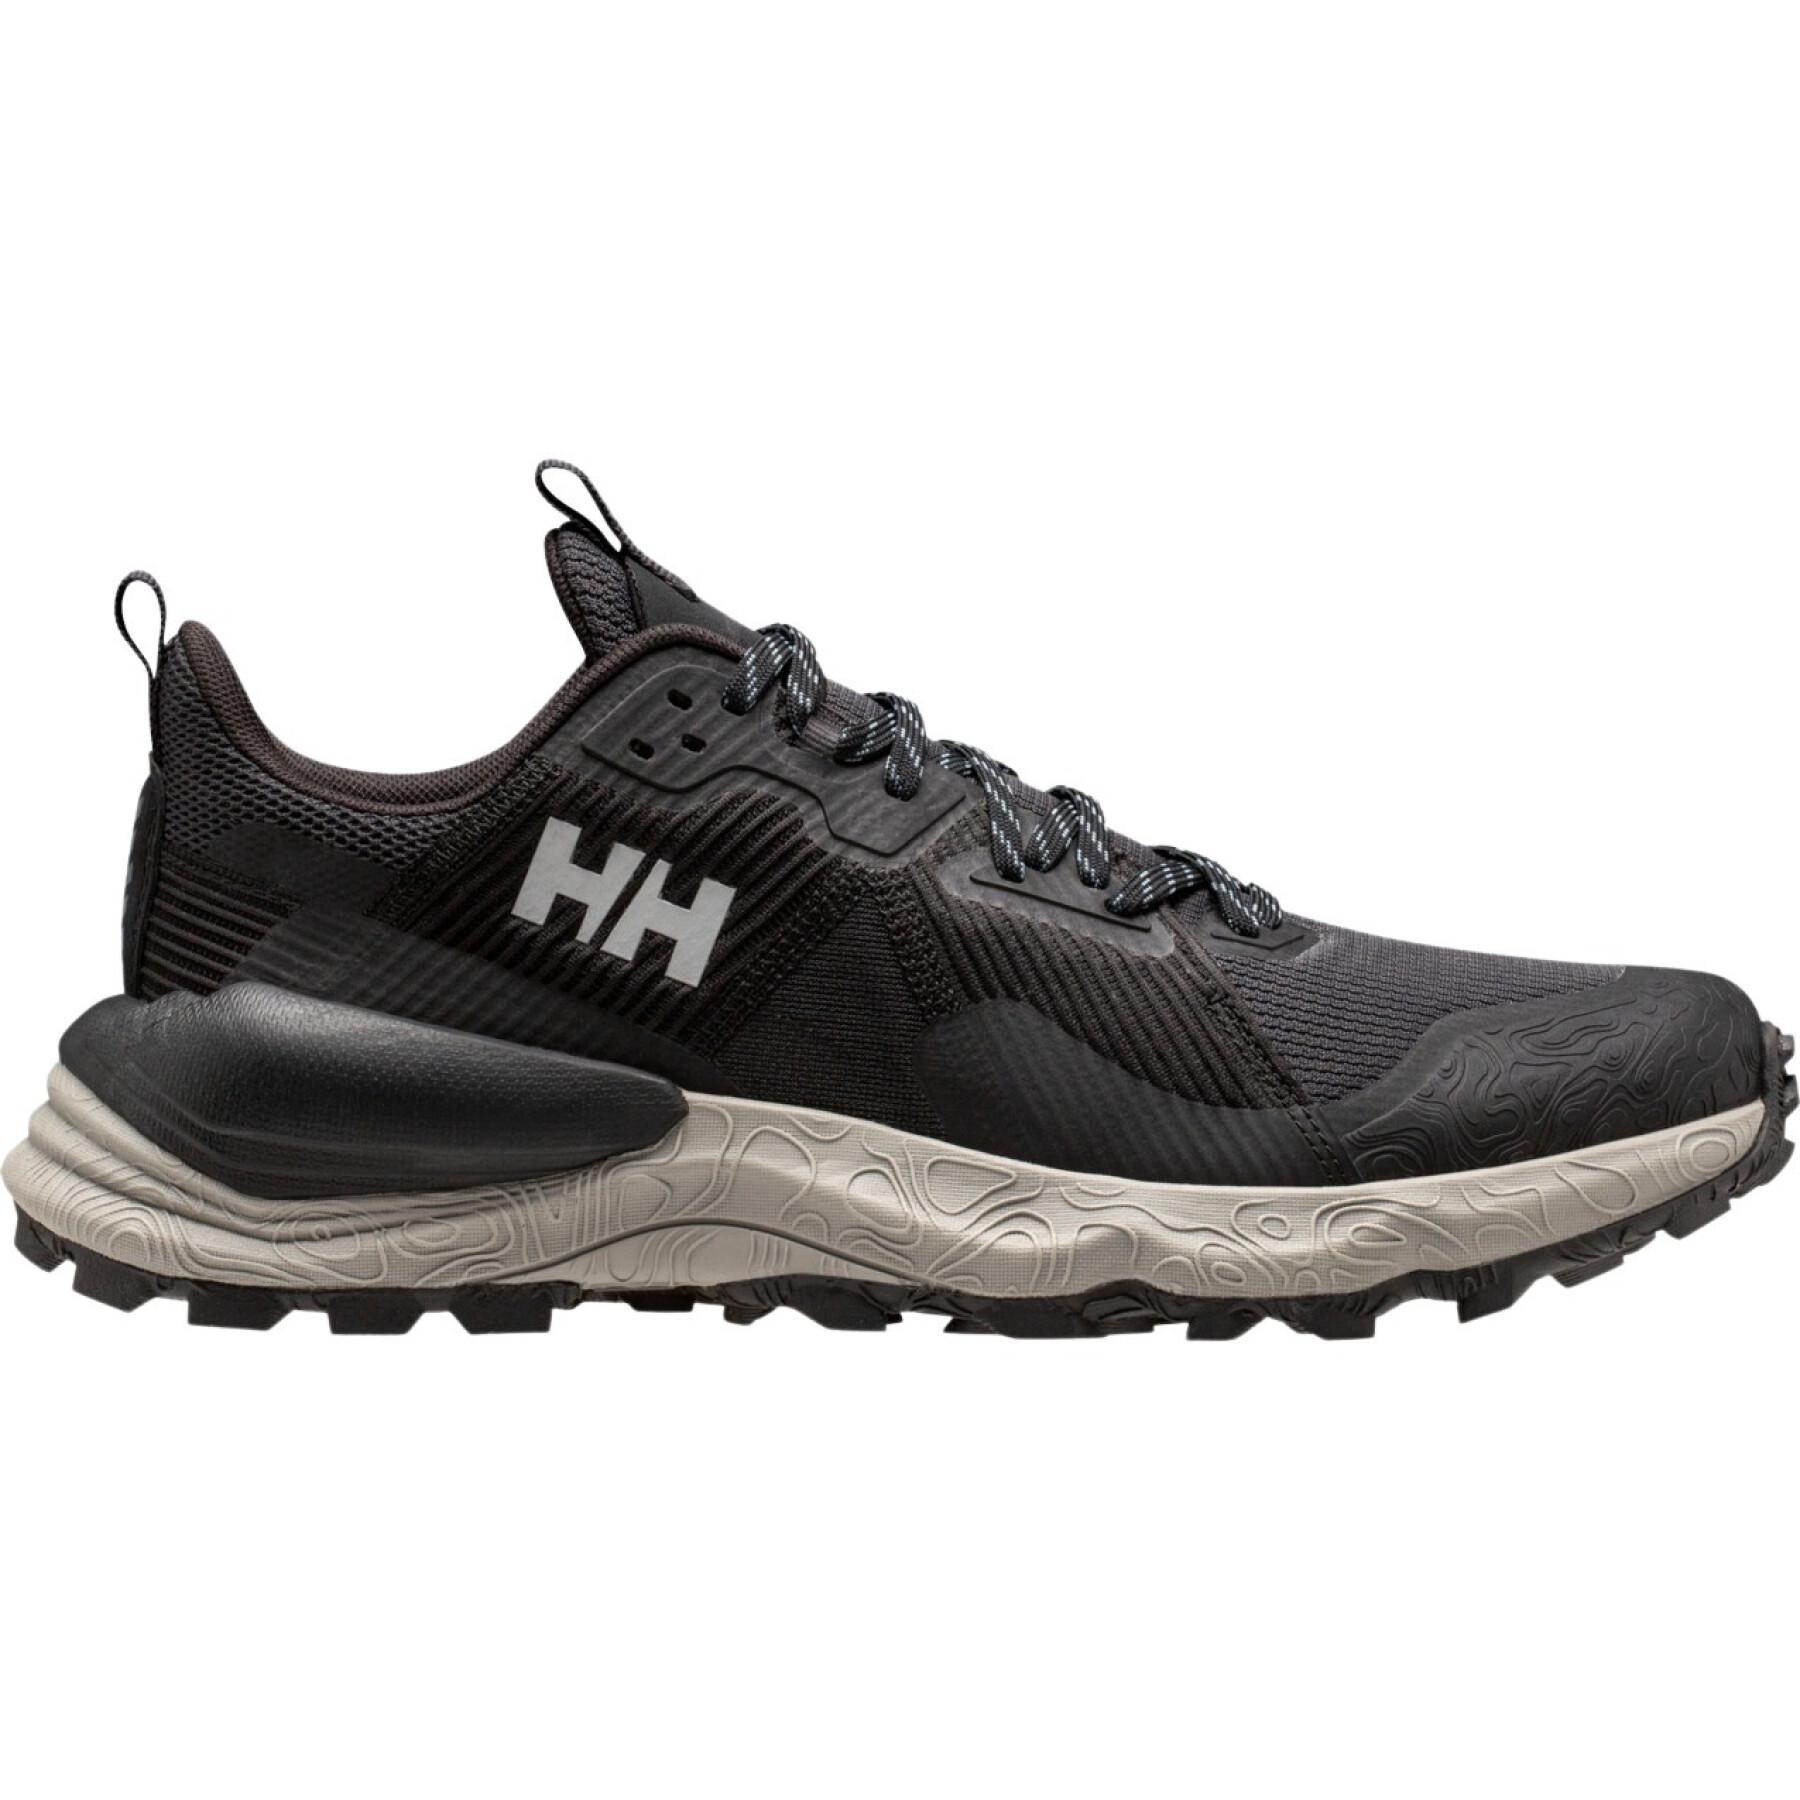 Shoes Helly Hansen hawk stapro tr